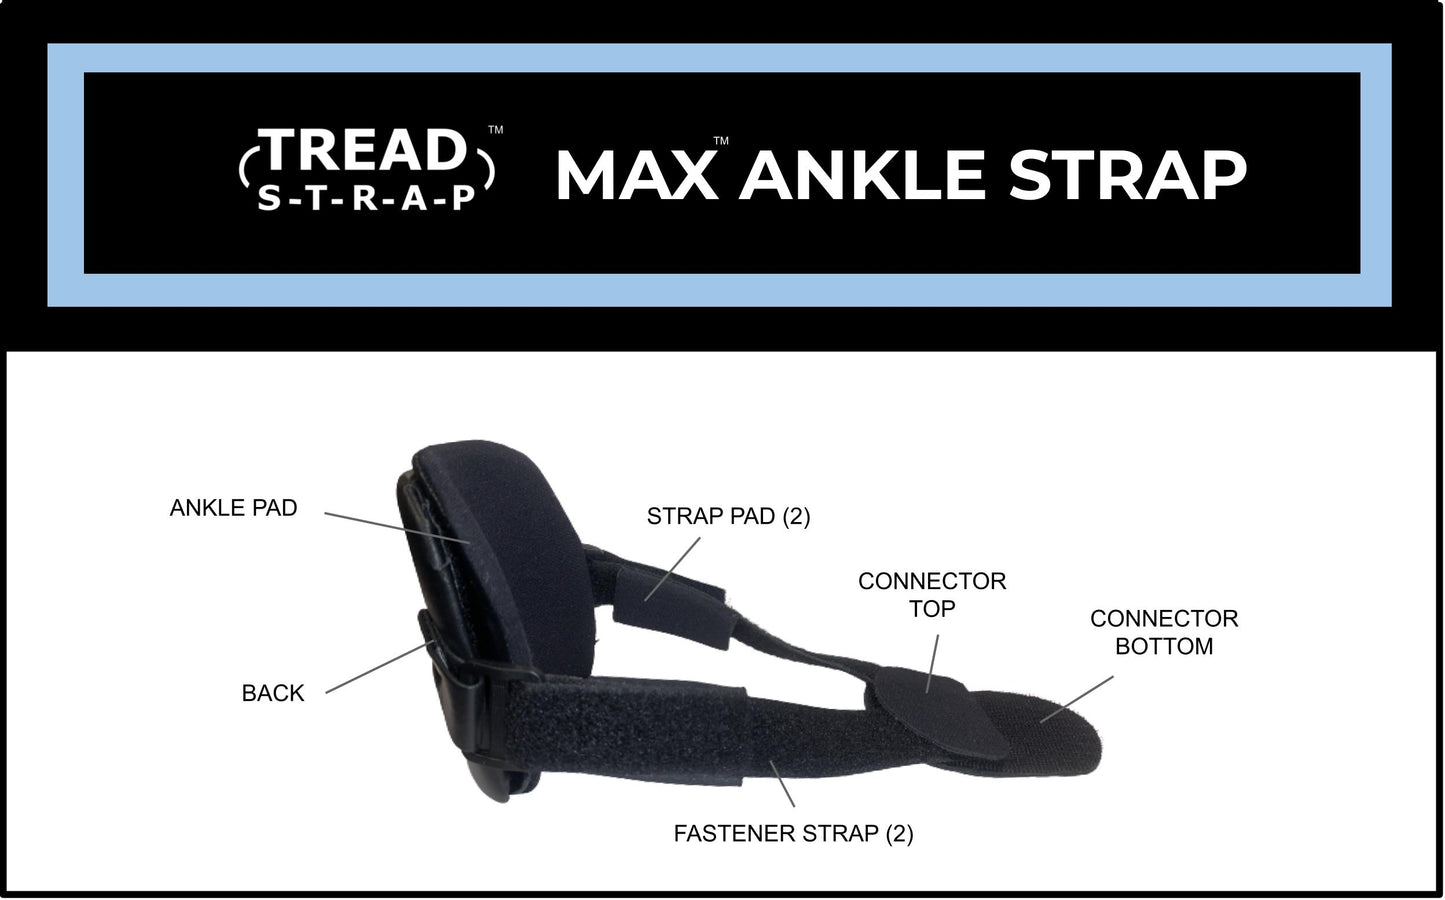 MAX ANKLE STRAP - Foot Drop Ankle-Foot Orthosis (AFO)